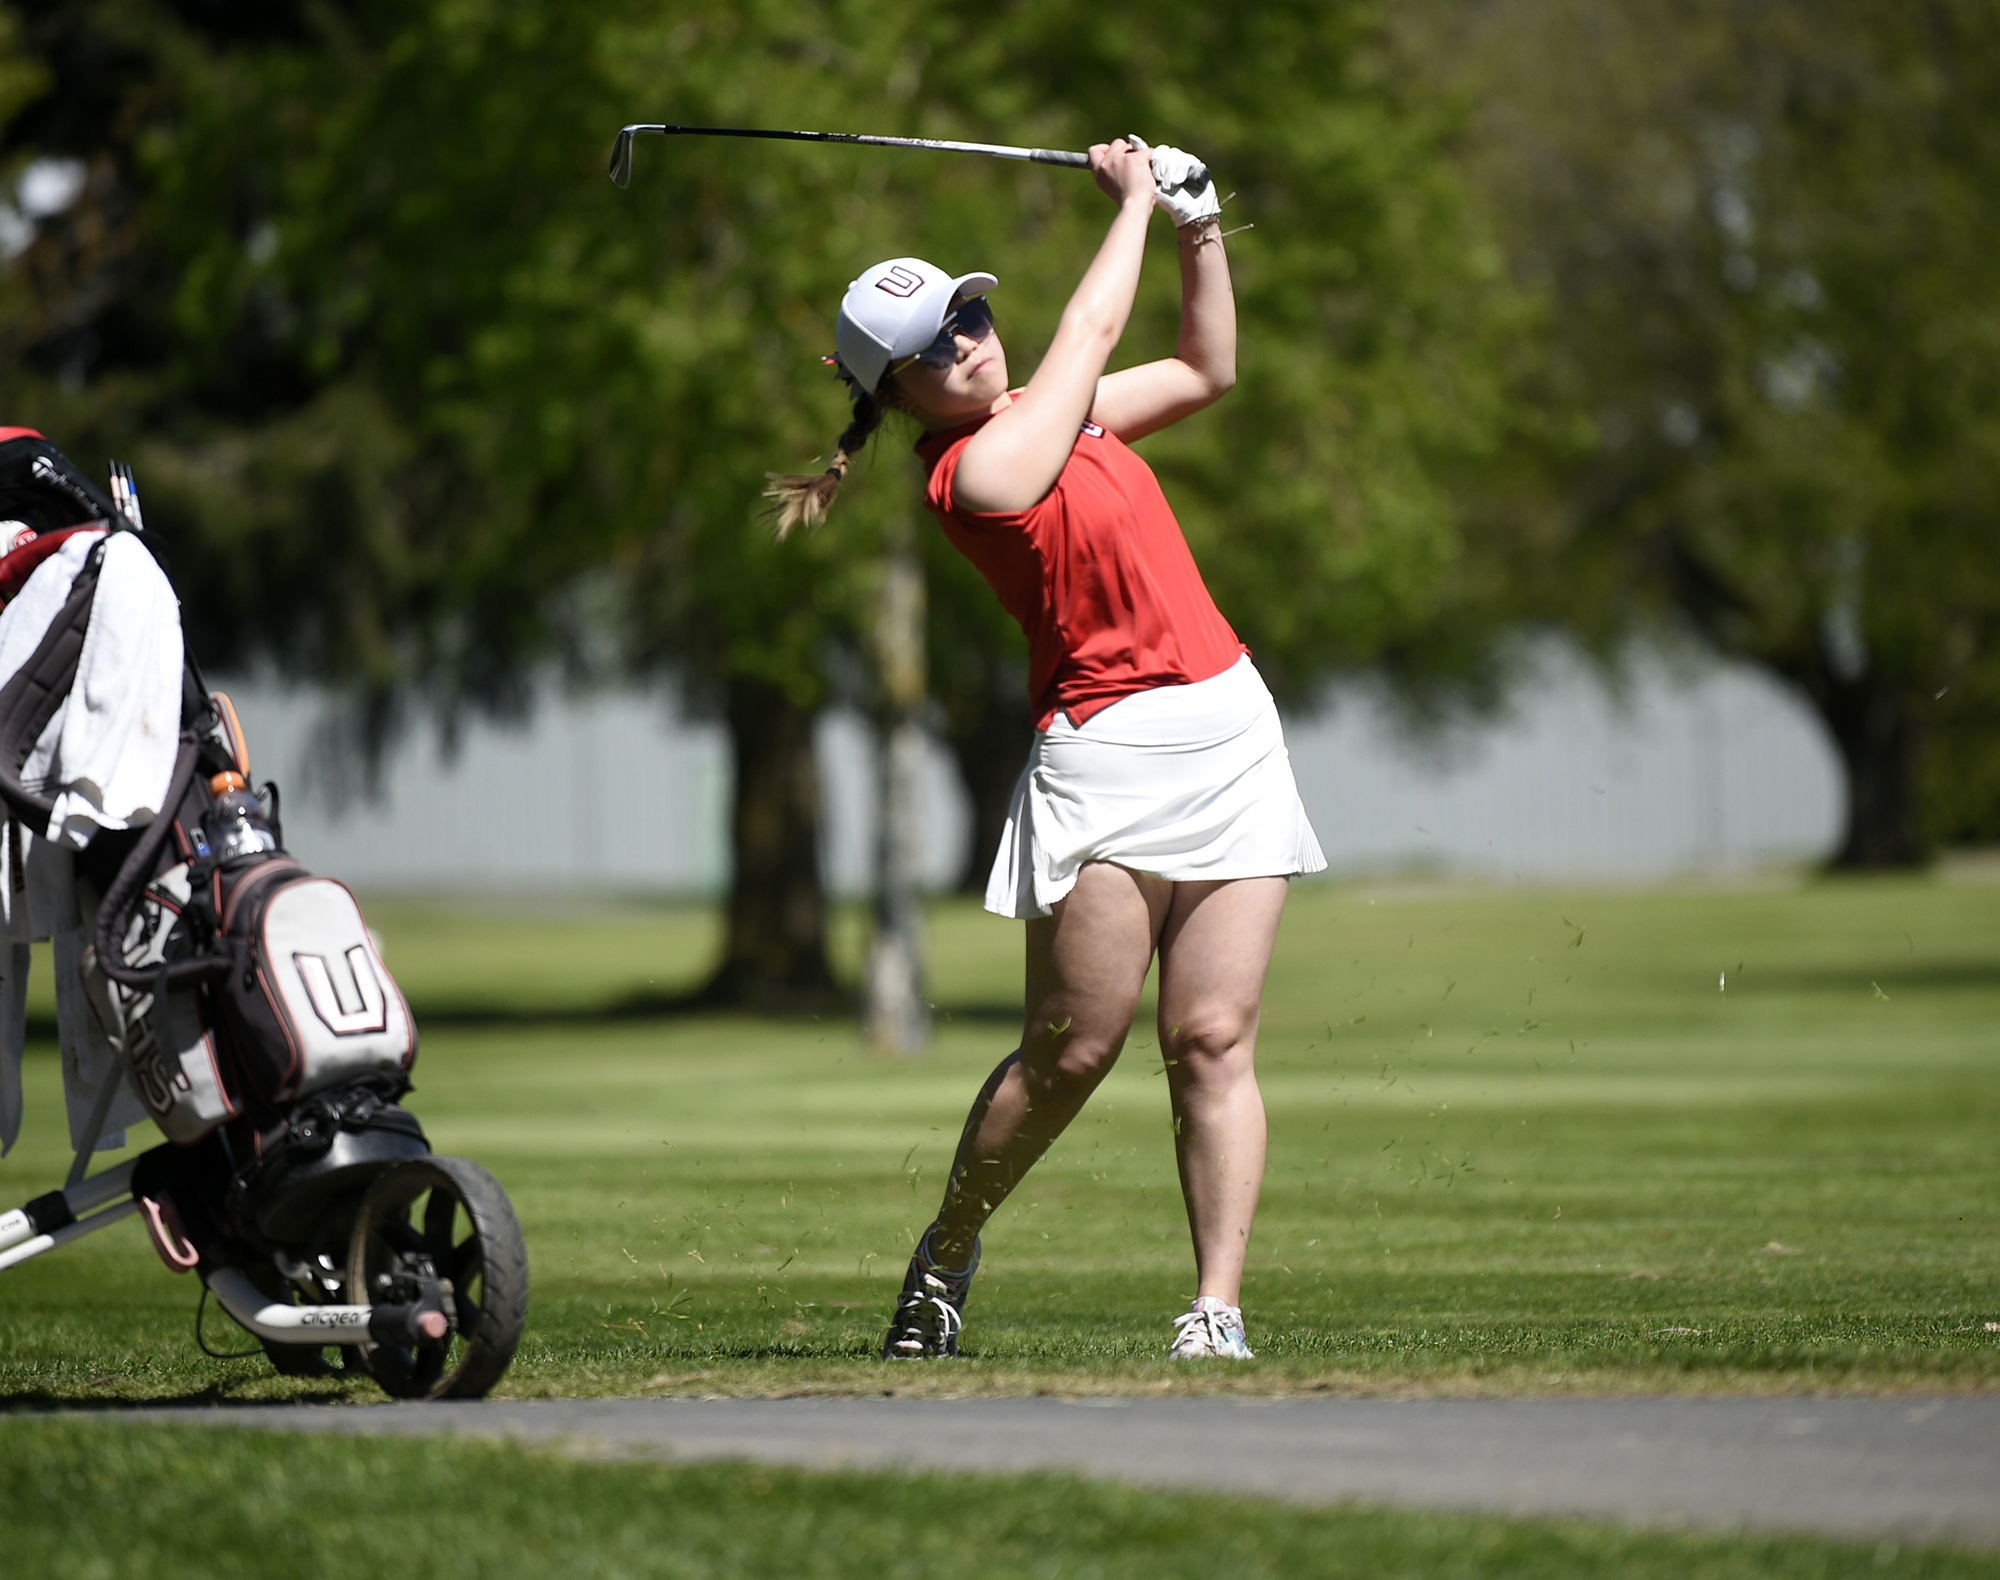 Jade Gruher of Union hits a shot on the 16th hole at Mint Valley Golf Course in Longview at the 4A girls golf district tournament on Wednesday, May 10, 2023.